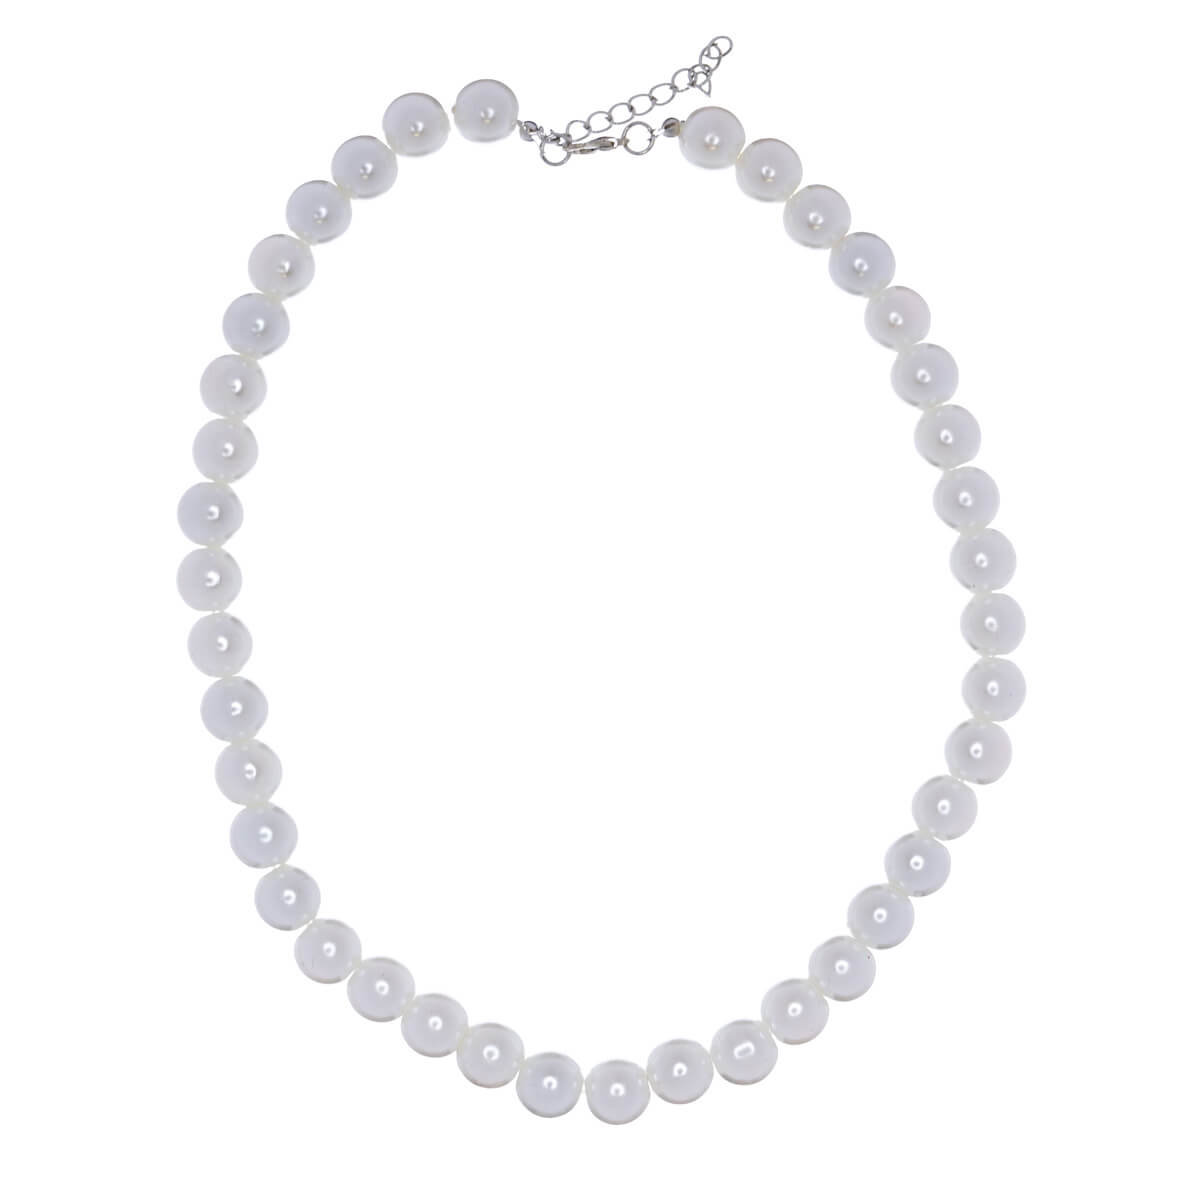 Pearl necklace necklace beads 12mm 49cm +5cm